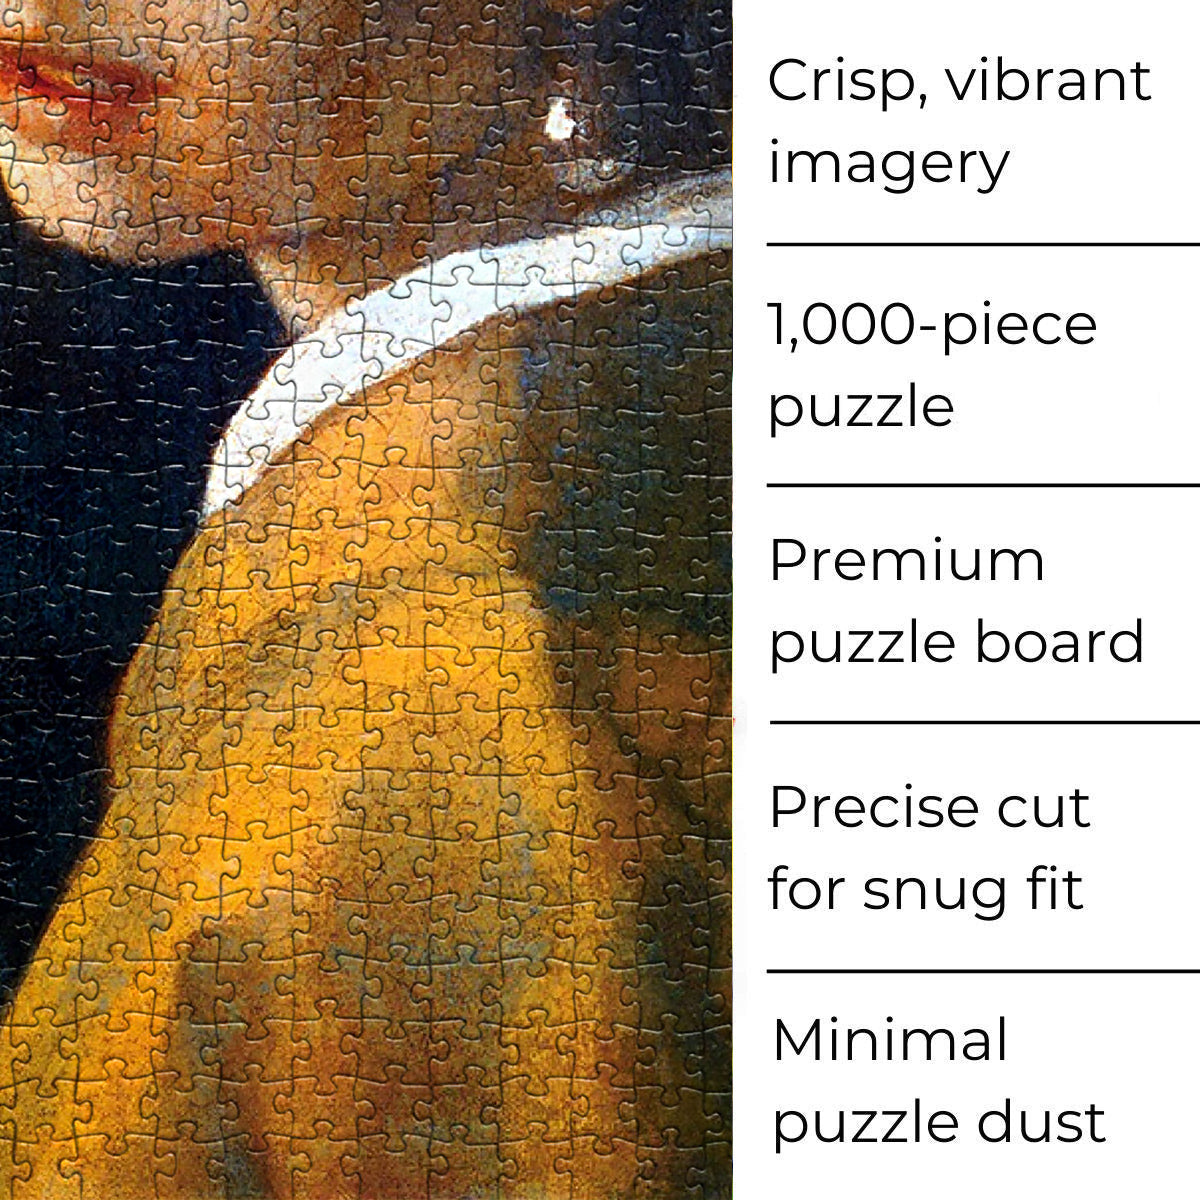 Framed Beauty: Eurographics' Girl With A Pearl Earring Jigsaw Puzzle